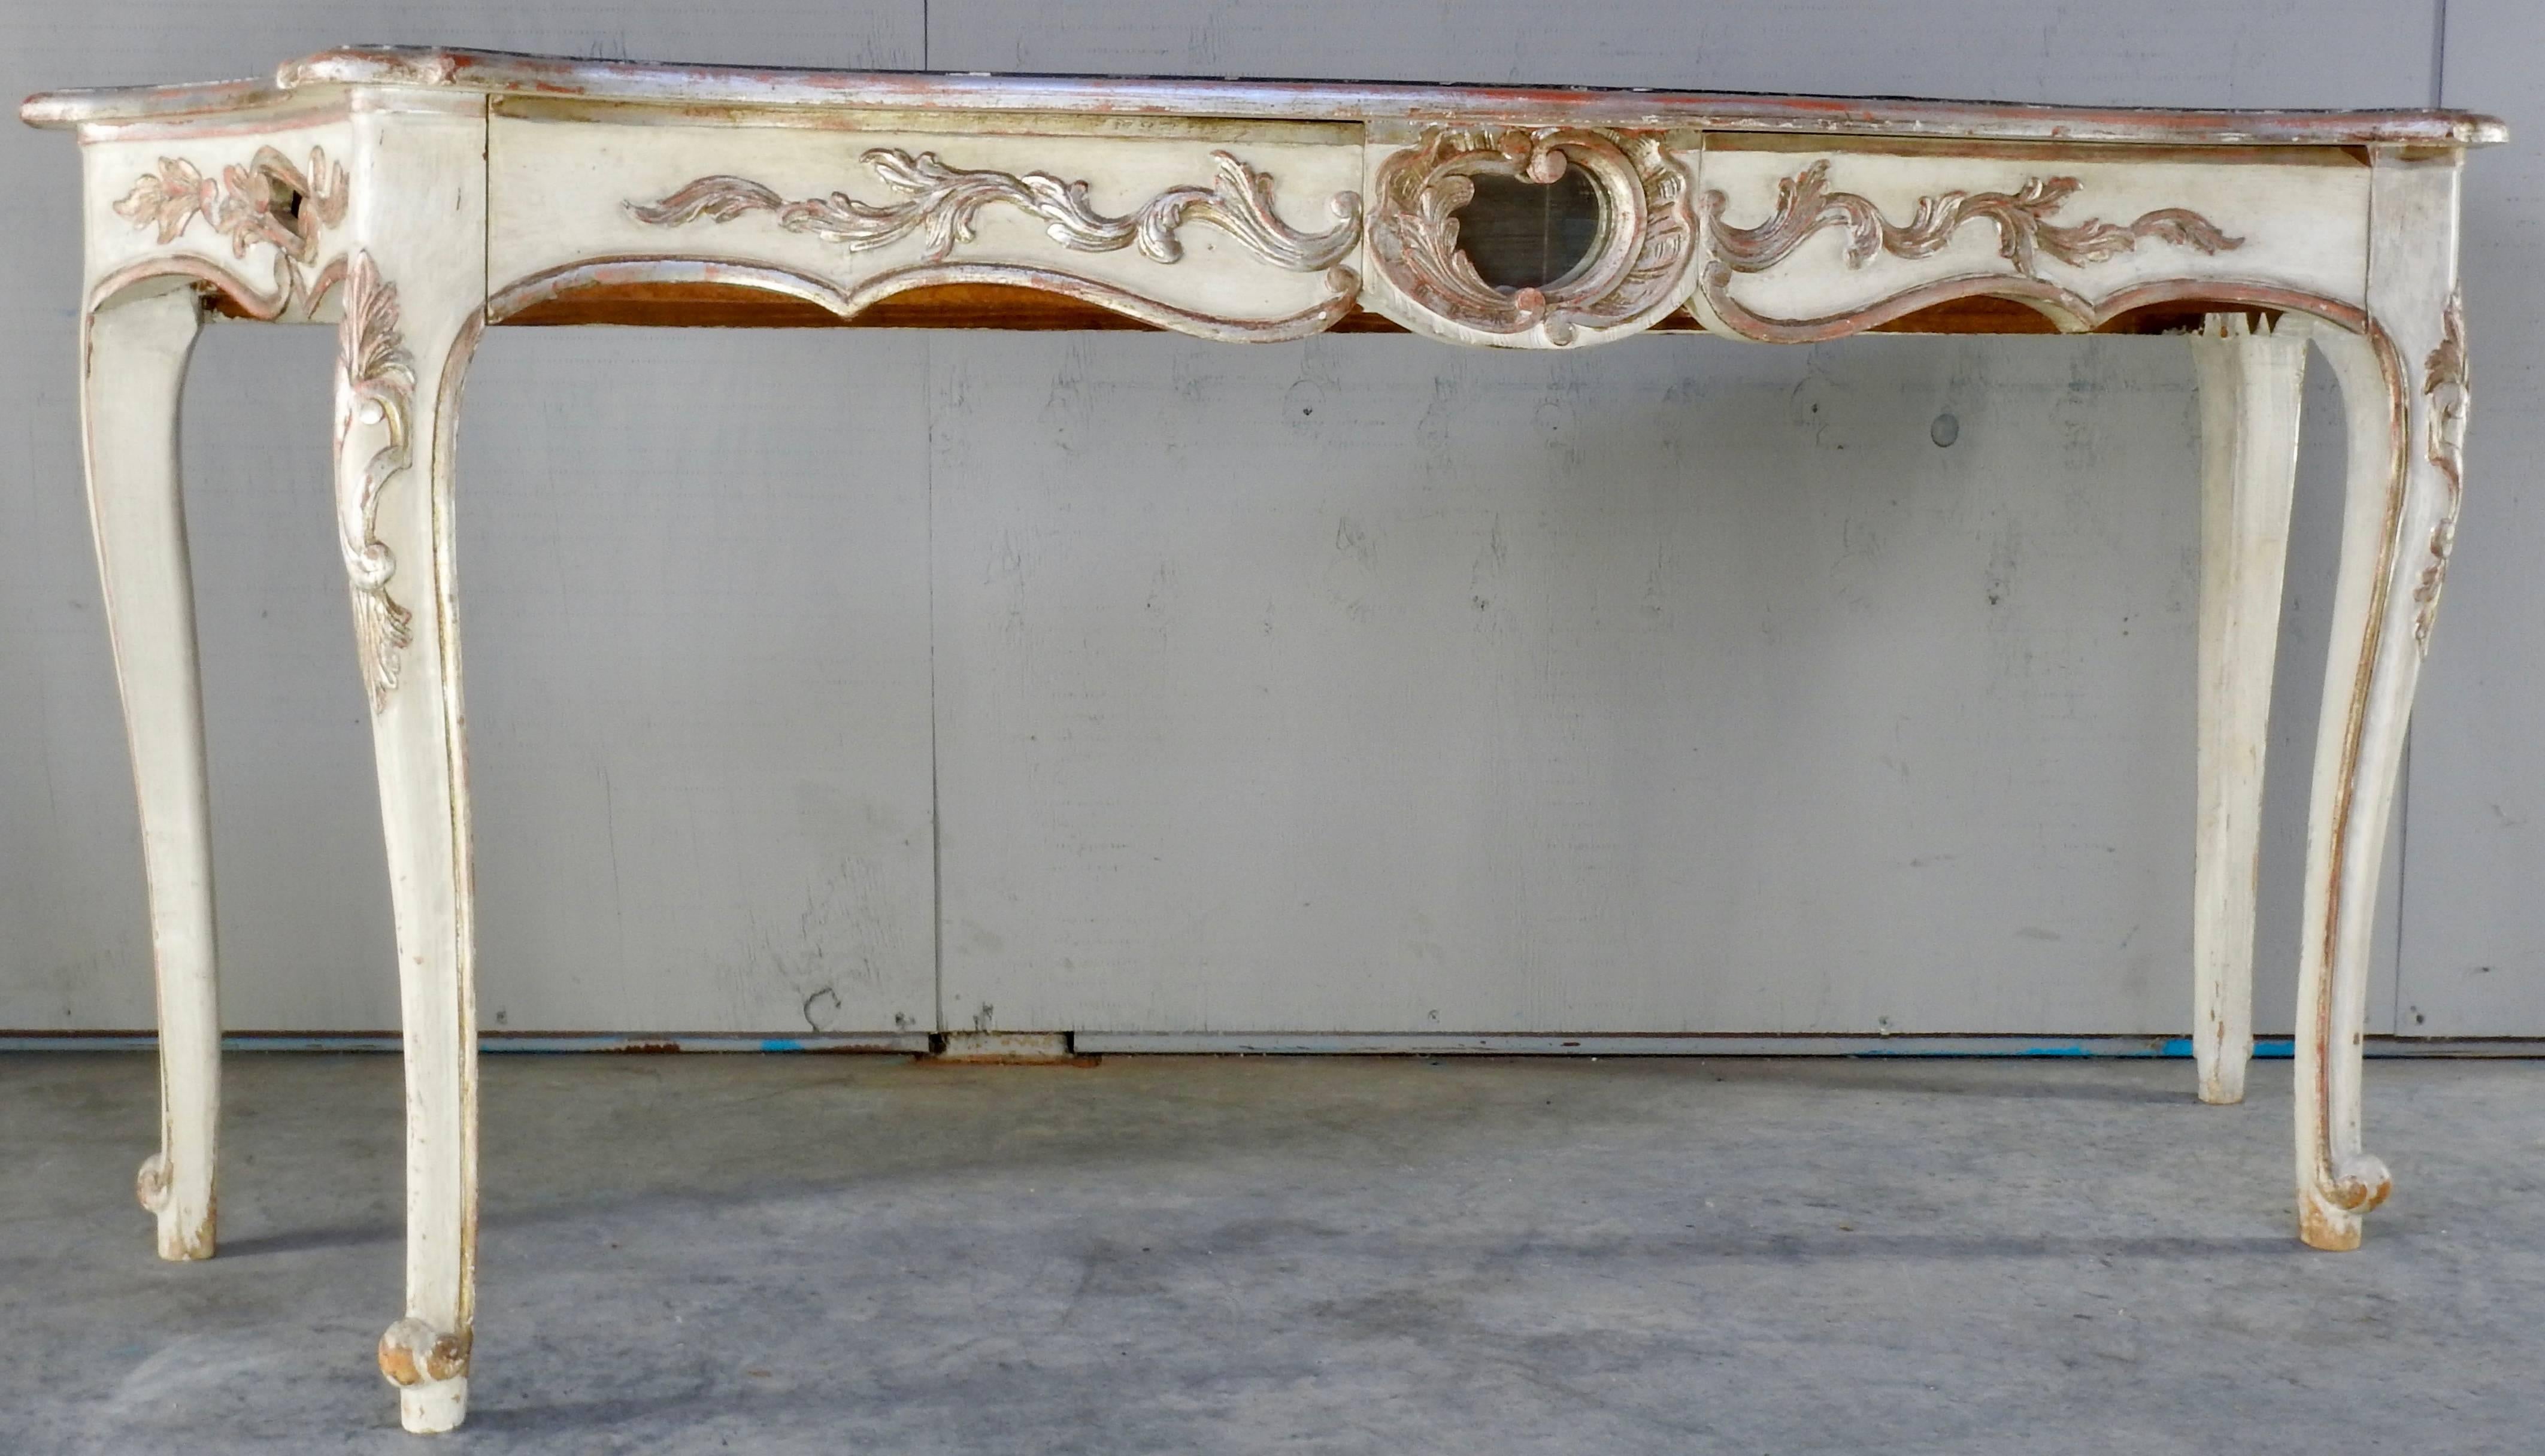 Offering this beautiful hand painted Italian console table with the base of white and silver gilt detail. The top has a trim that is a beautiful deep green. There are three cut-outs, two on the ends and one in the centre that are backed with mirror.